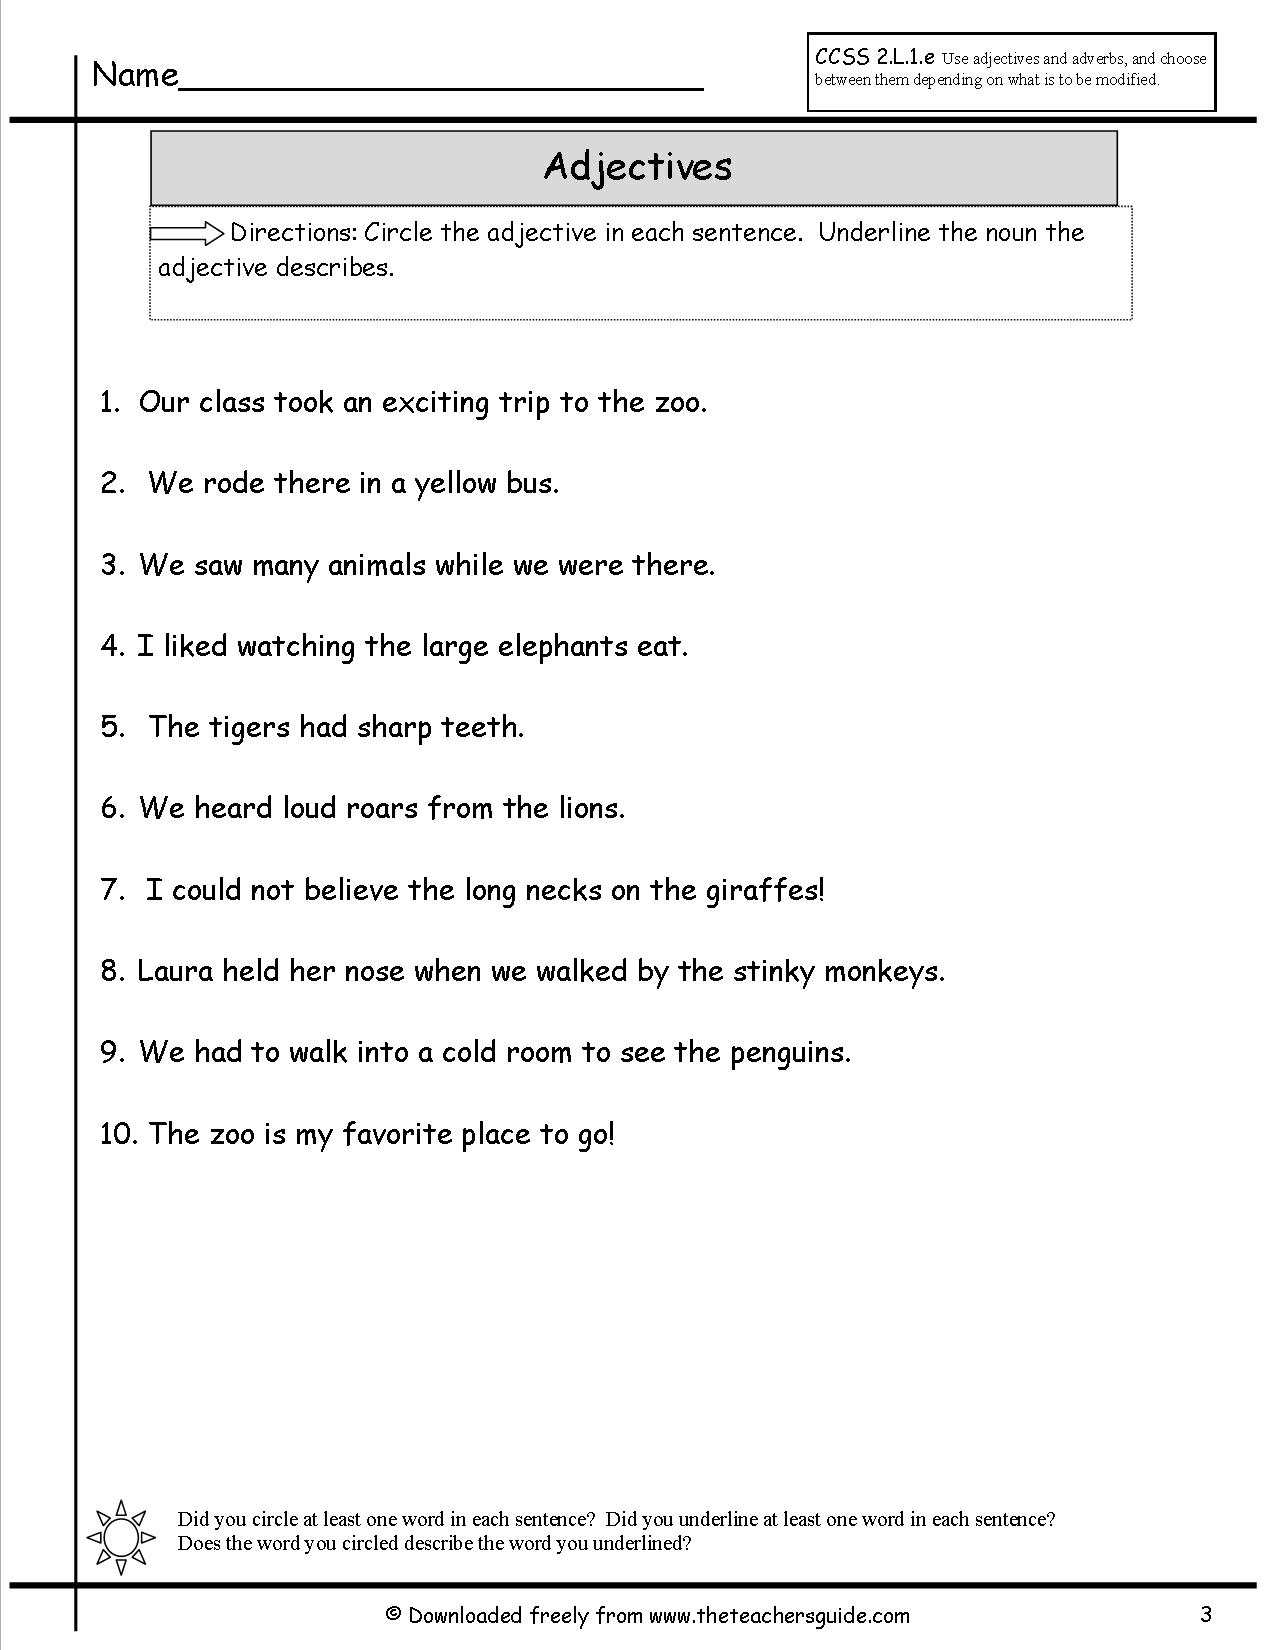 Graded adjectives. Word building adjectives Worksheets.